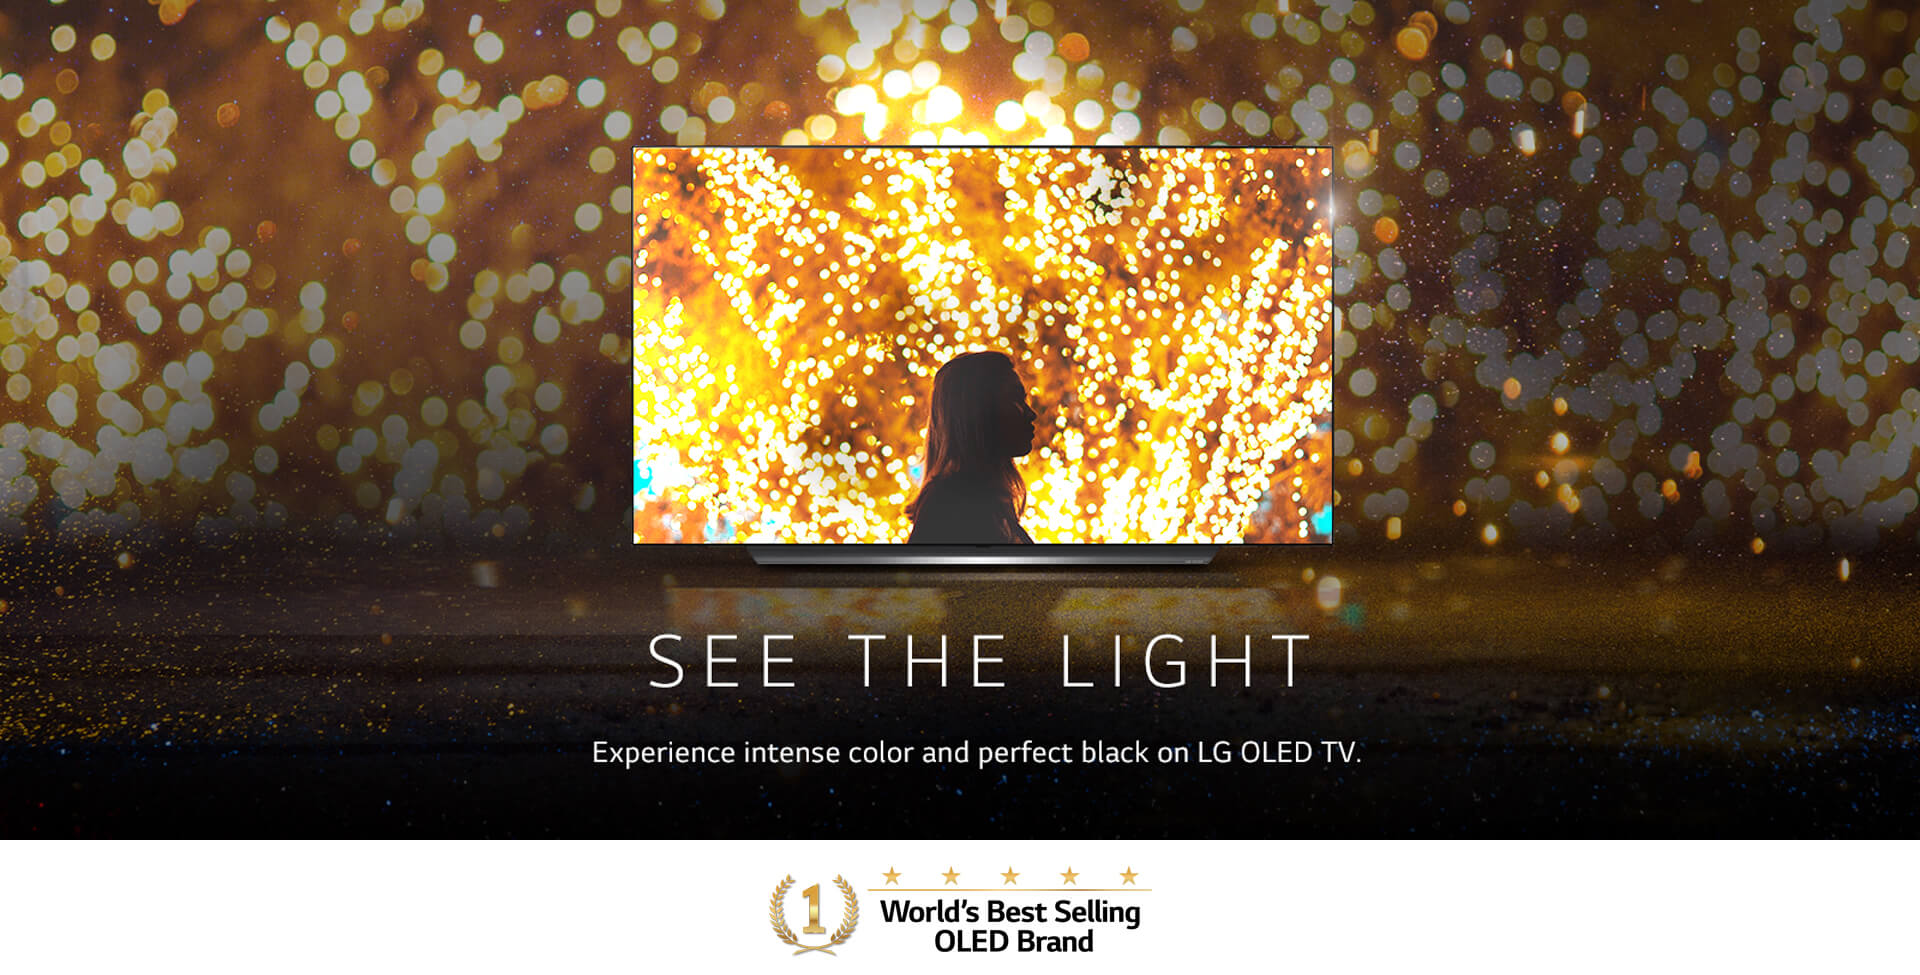 See the light. Experience intense color and perfect black on LG OLED TV. World's Best Selling OLED Brand Mark